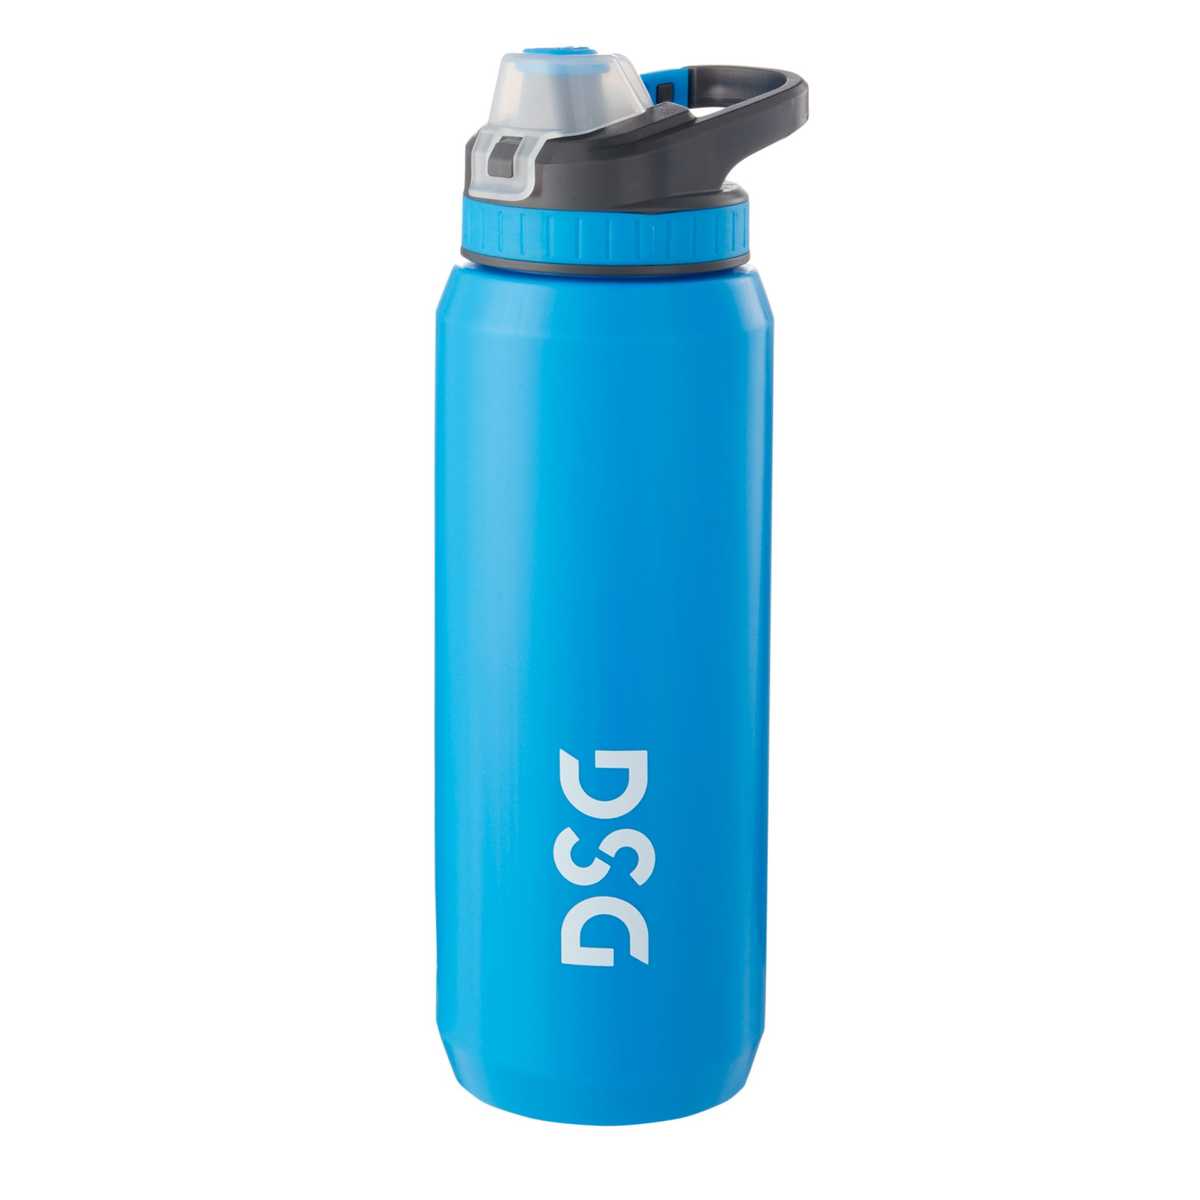 Dick's Sporting Goods: Hydro Flask Water Bottles and YETI Tumblers